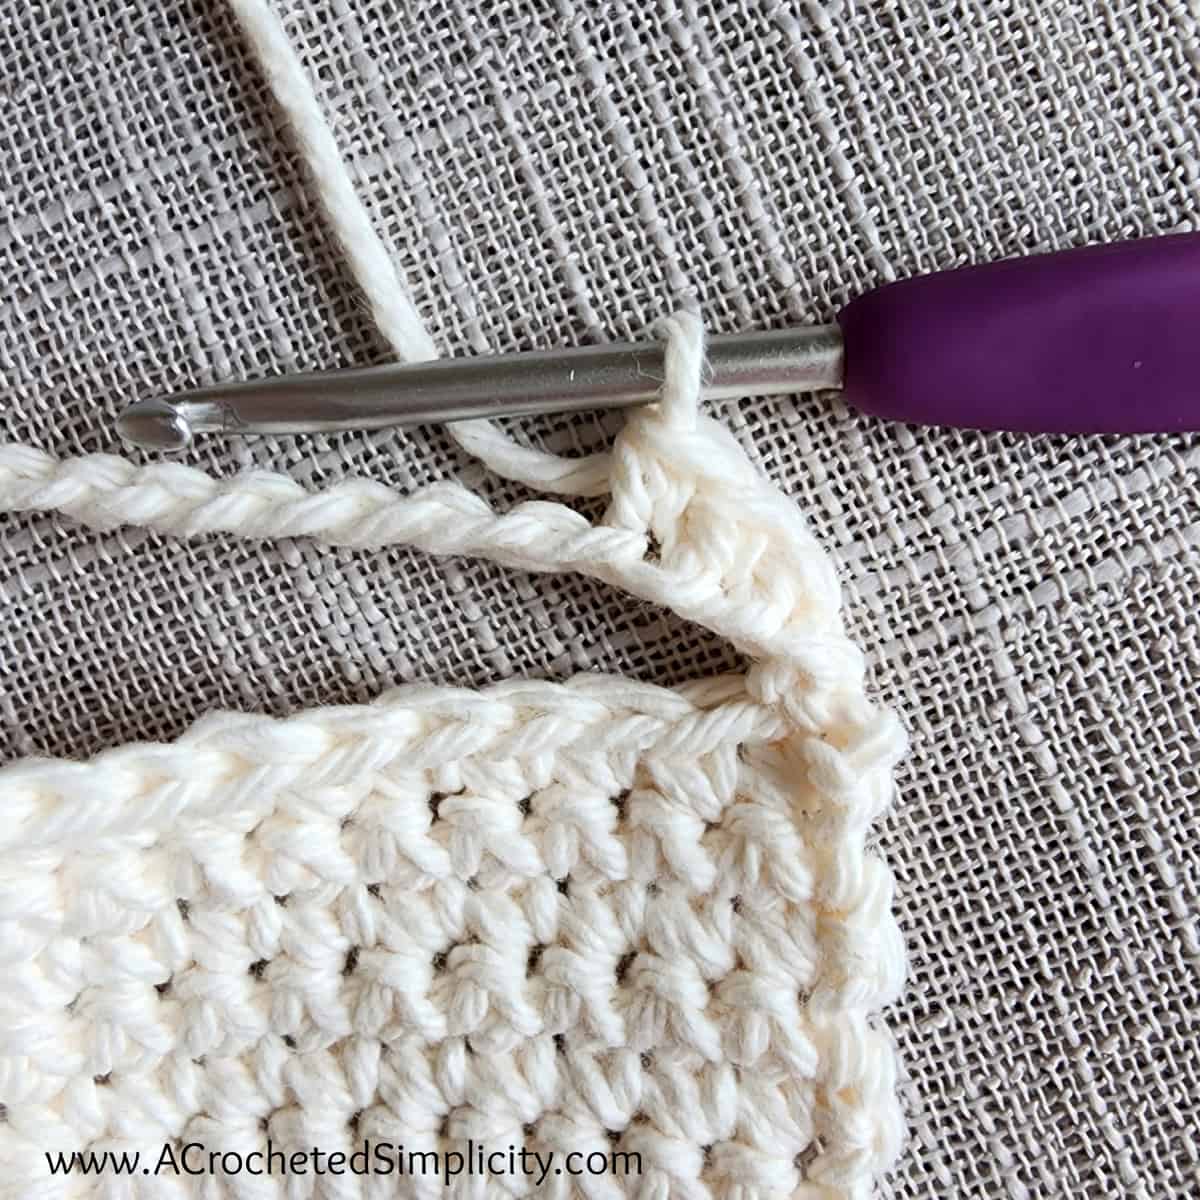 Crochet in the back hump of the chain.